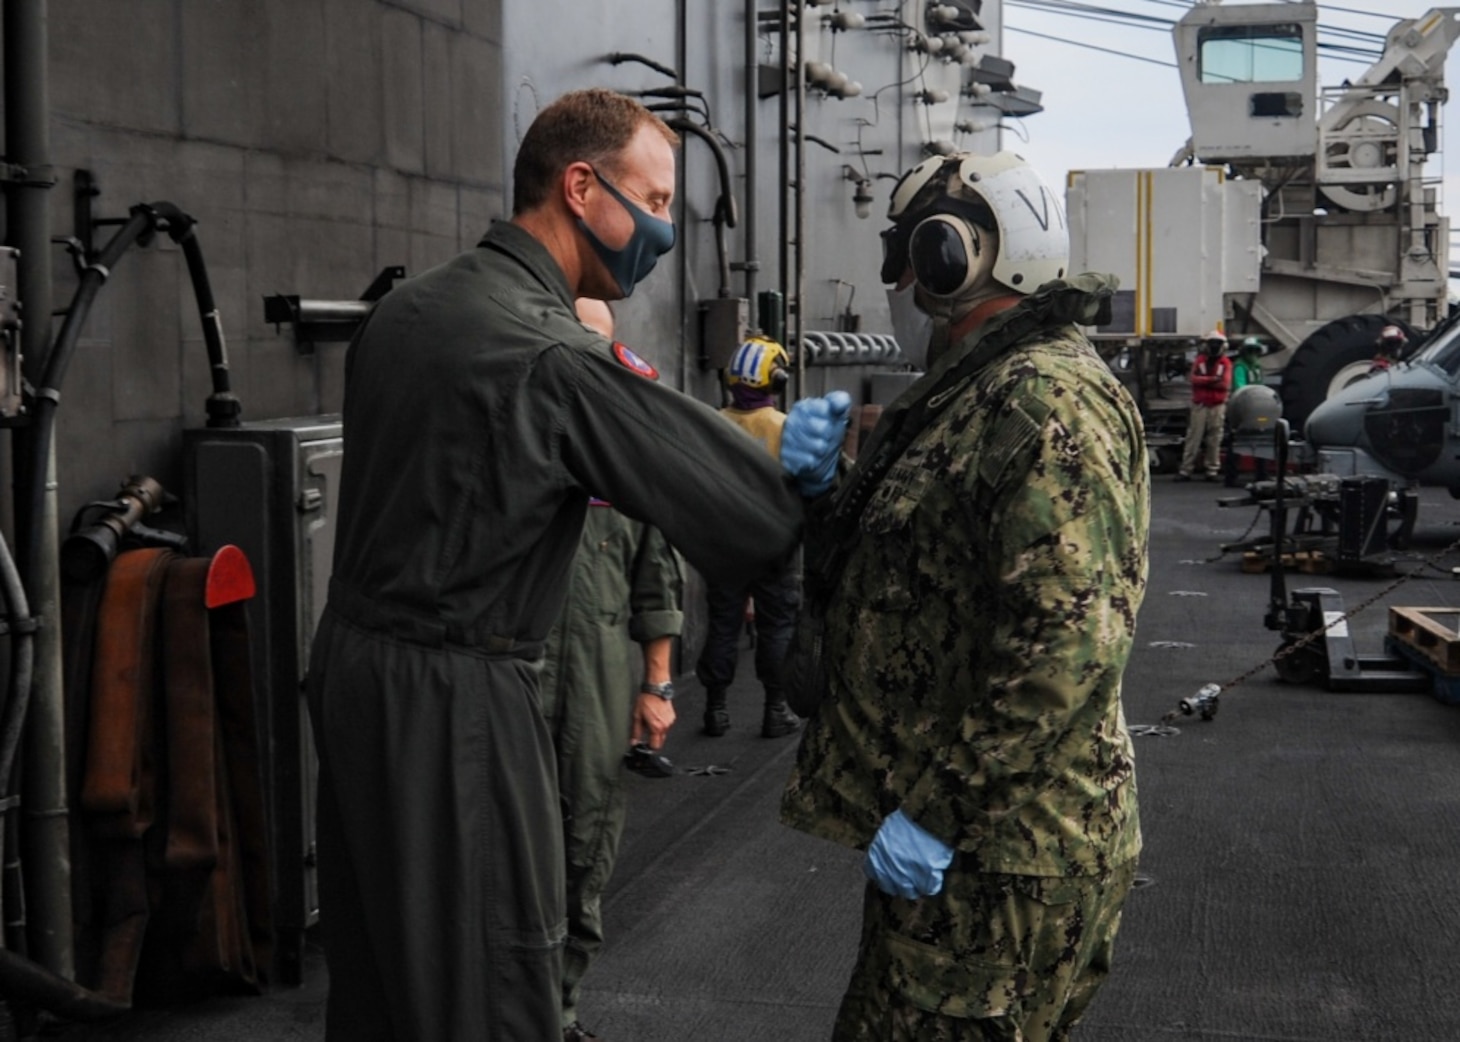 Rear Adm. George Wikoff greets Rear Adm. Will Pennington on the flight deck aboard America’s only forward-deployed aircraft carrier USS Ronald Reagan (CVN 76).